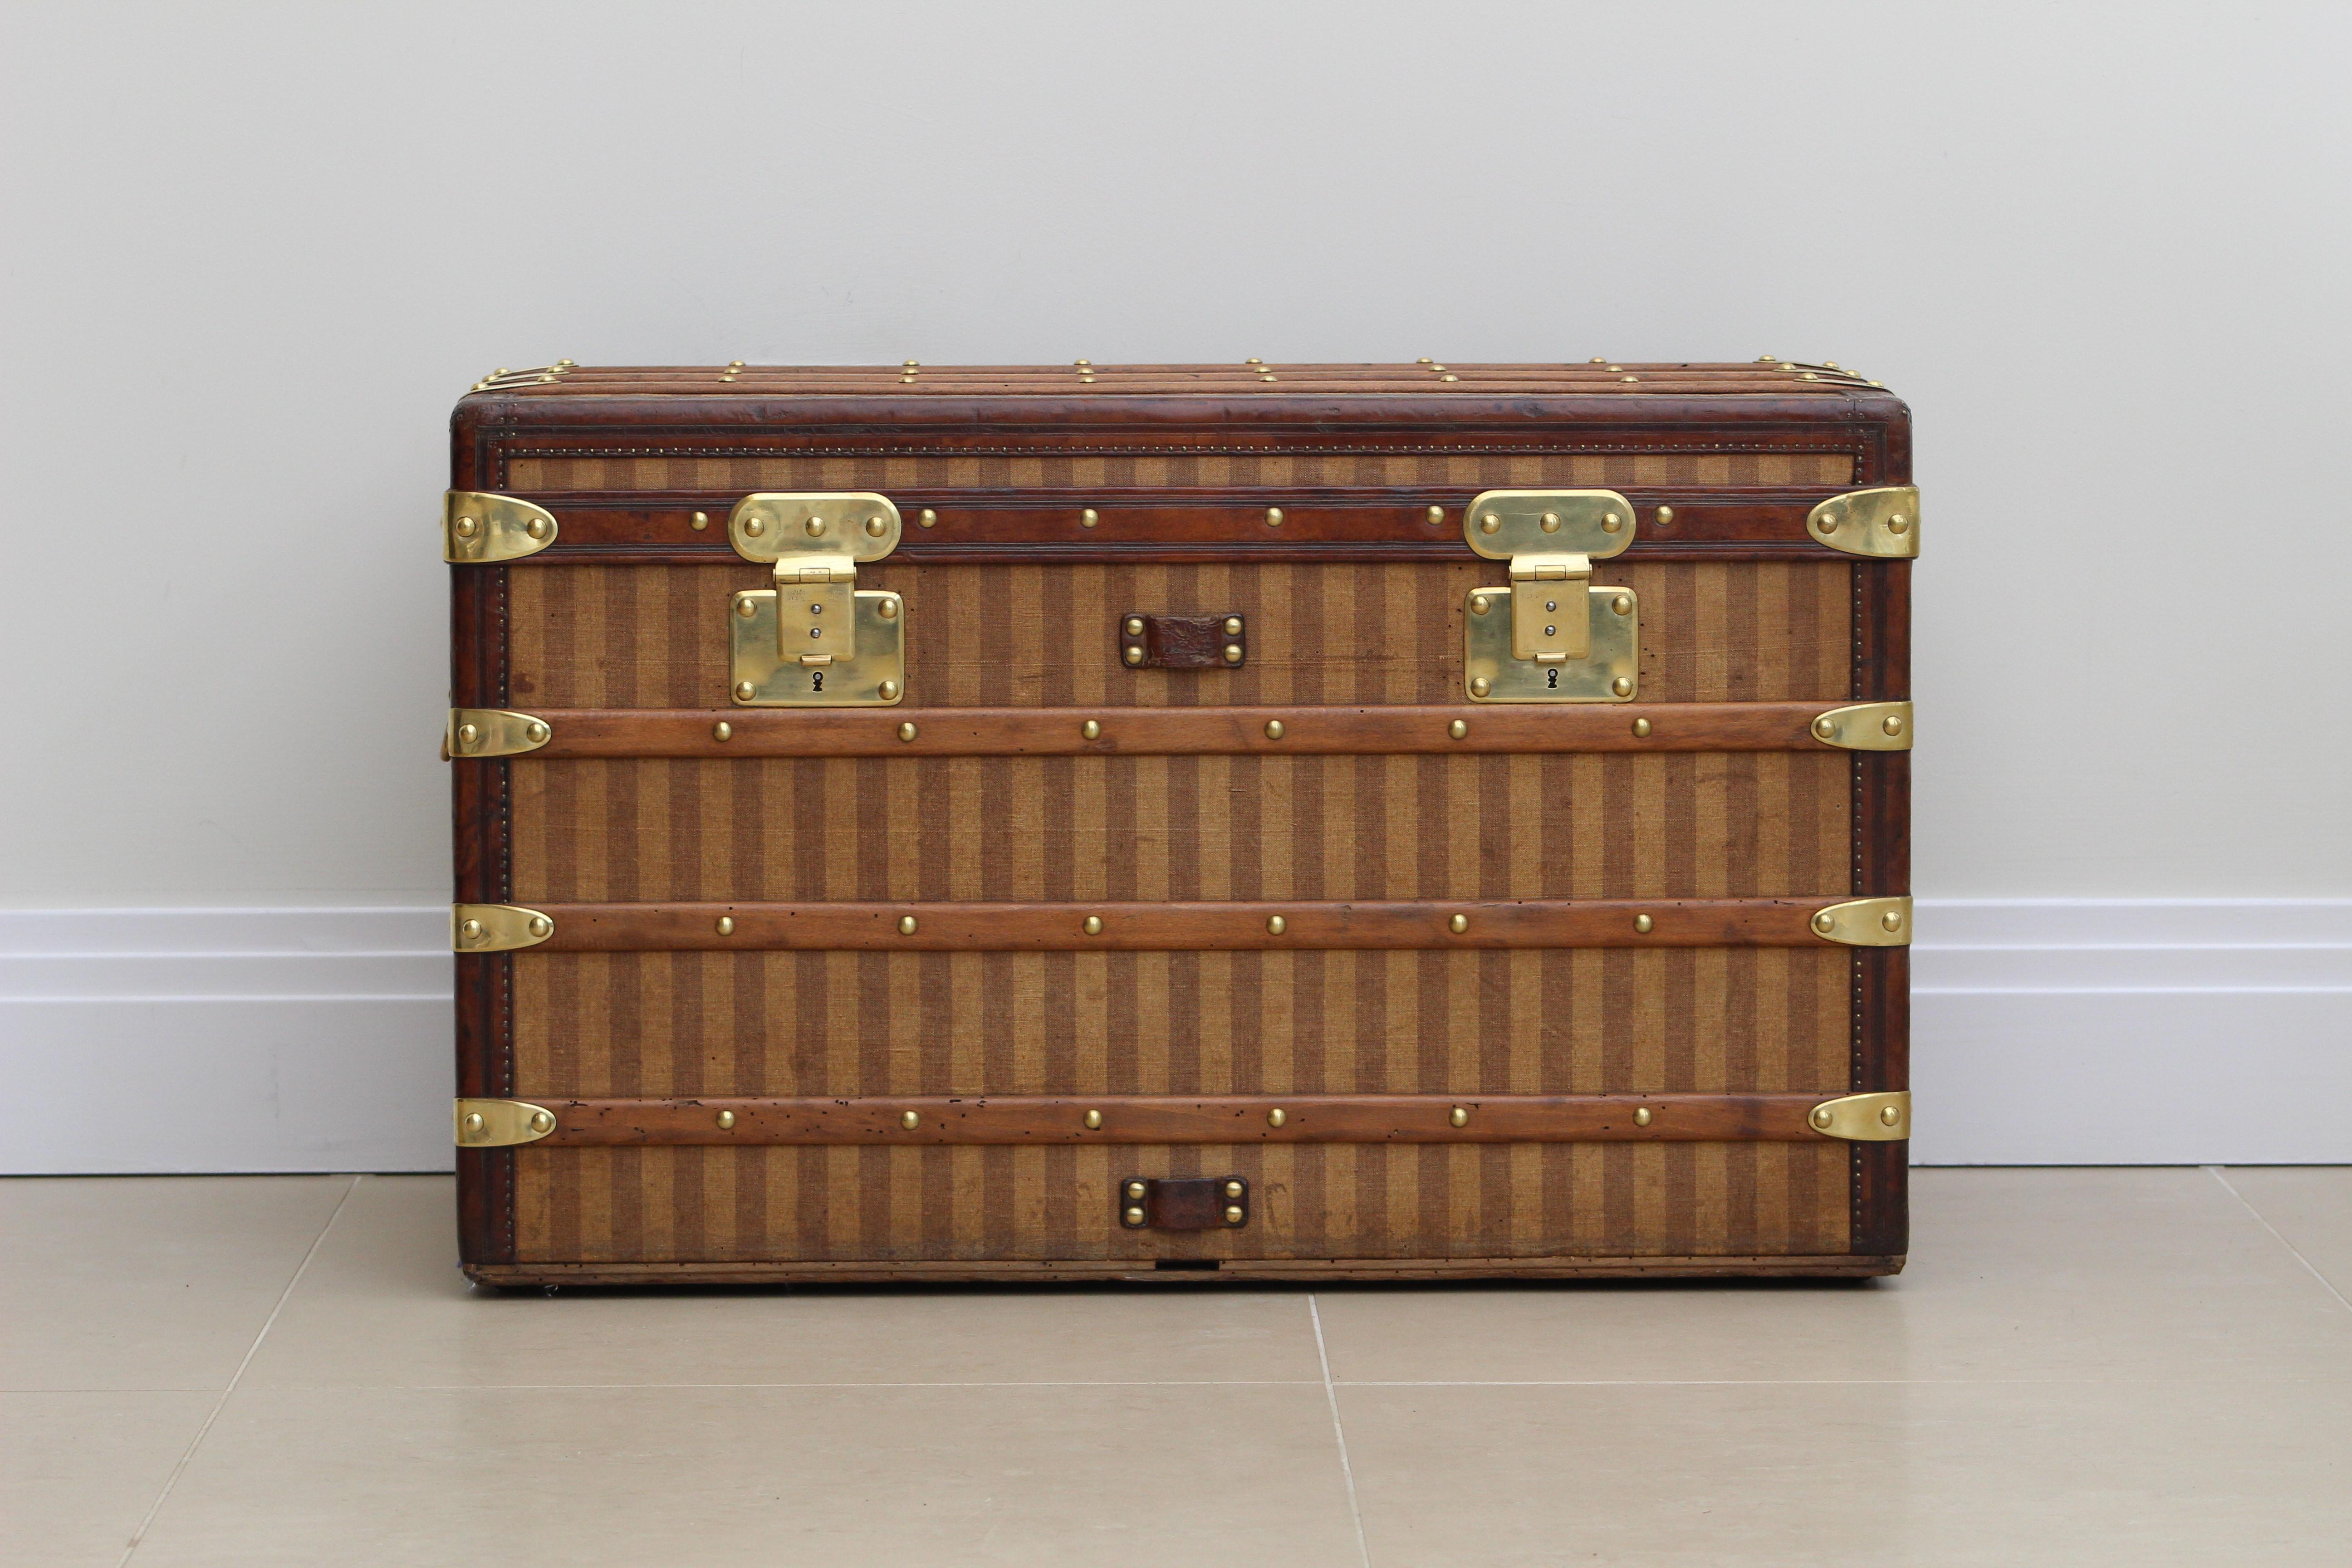 The Louis Vuitton Rayee Trunk from the 1870s stands as a paragon of elegance and timeless craftsmanship. At first glance, its exterior captivates with the iconic Rayee striped canvas, immediately hinting at the attention to detail and aesthetic